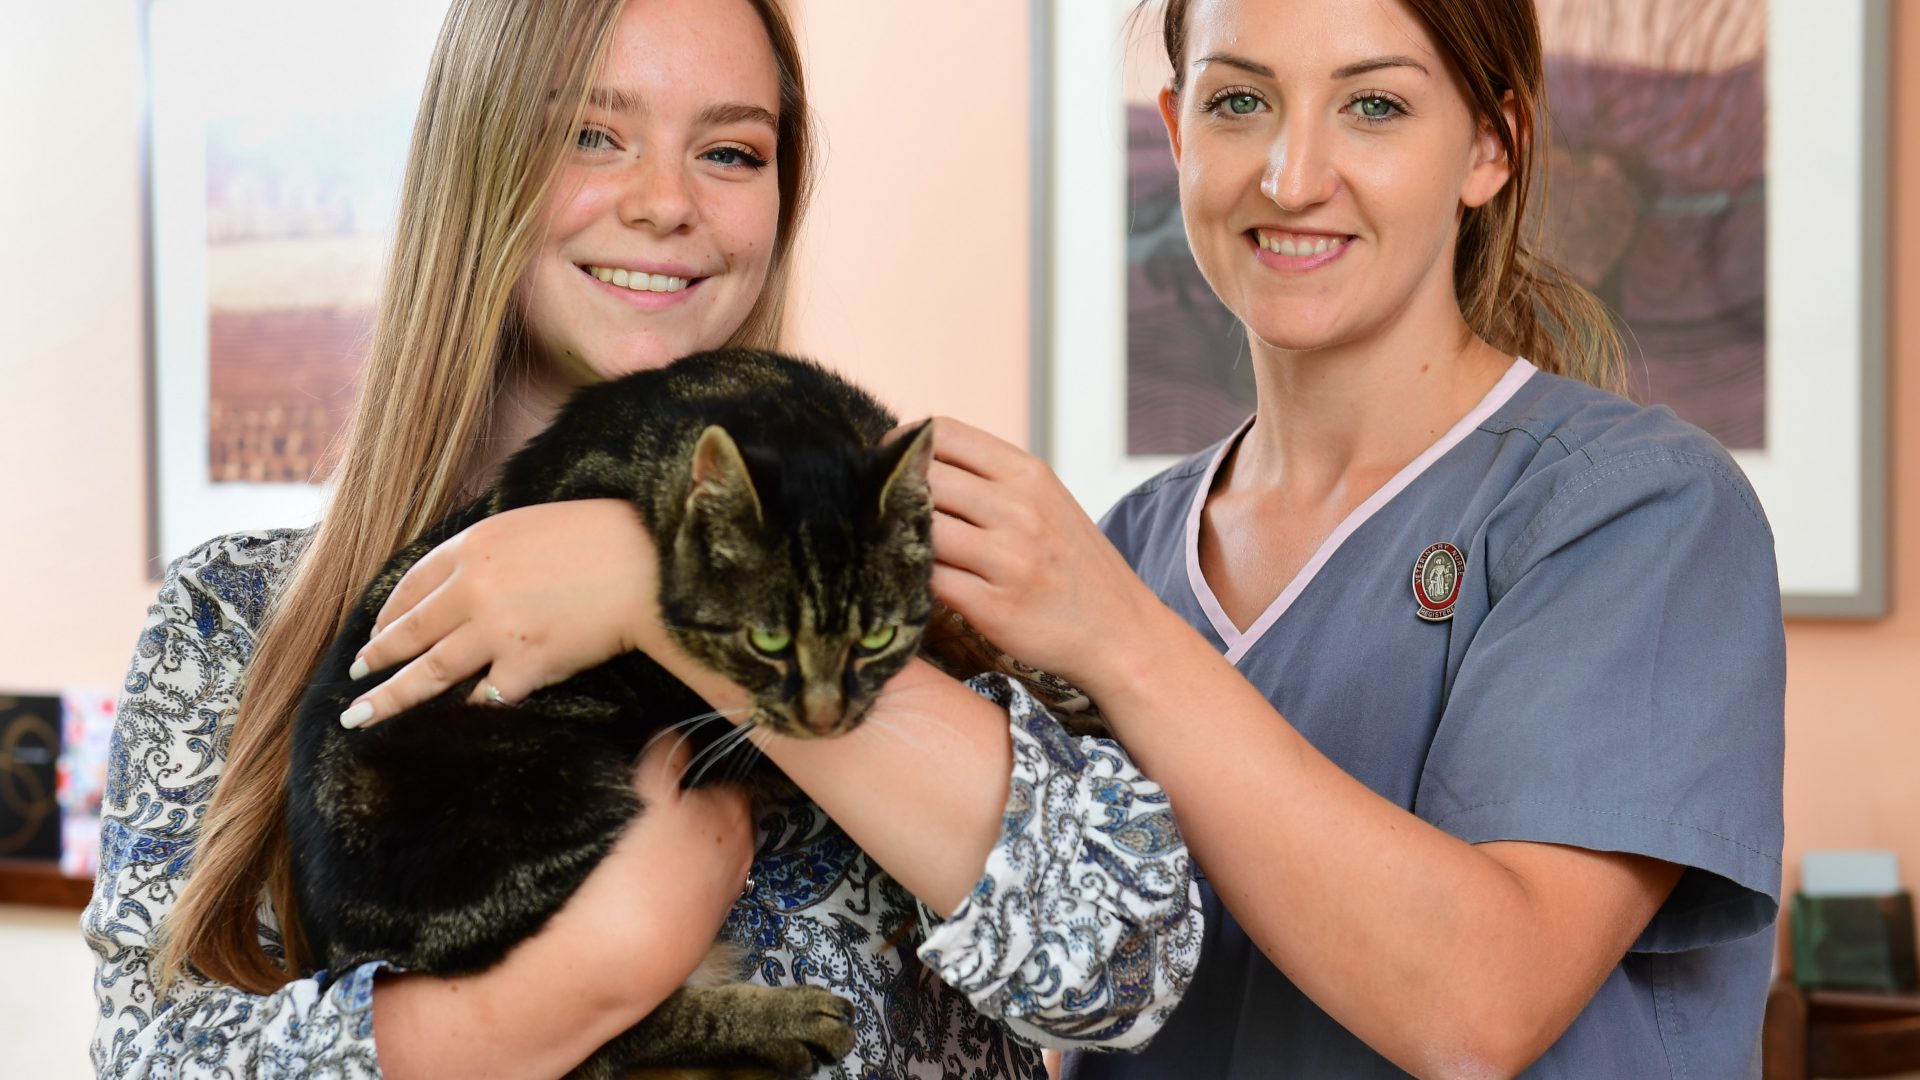 Family’s joy after missing cat is found after two years – thanks to microchip